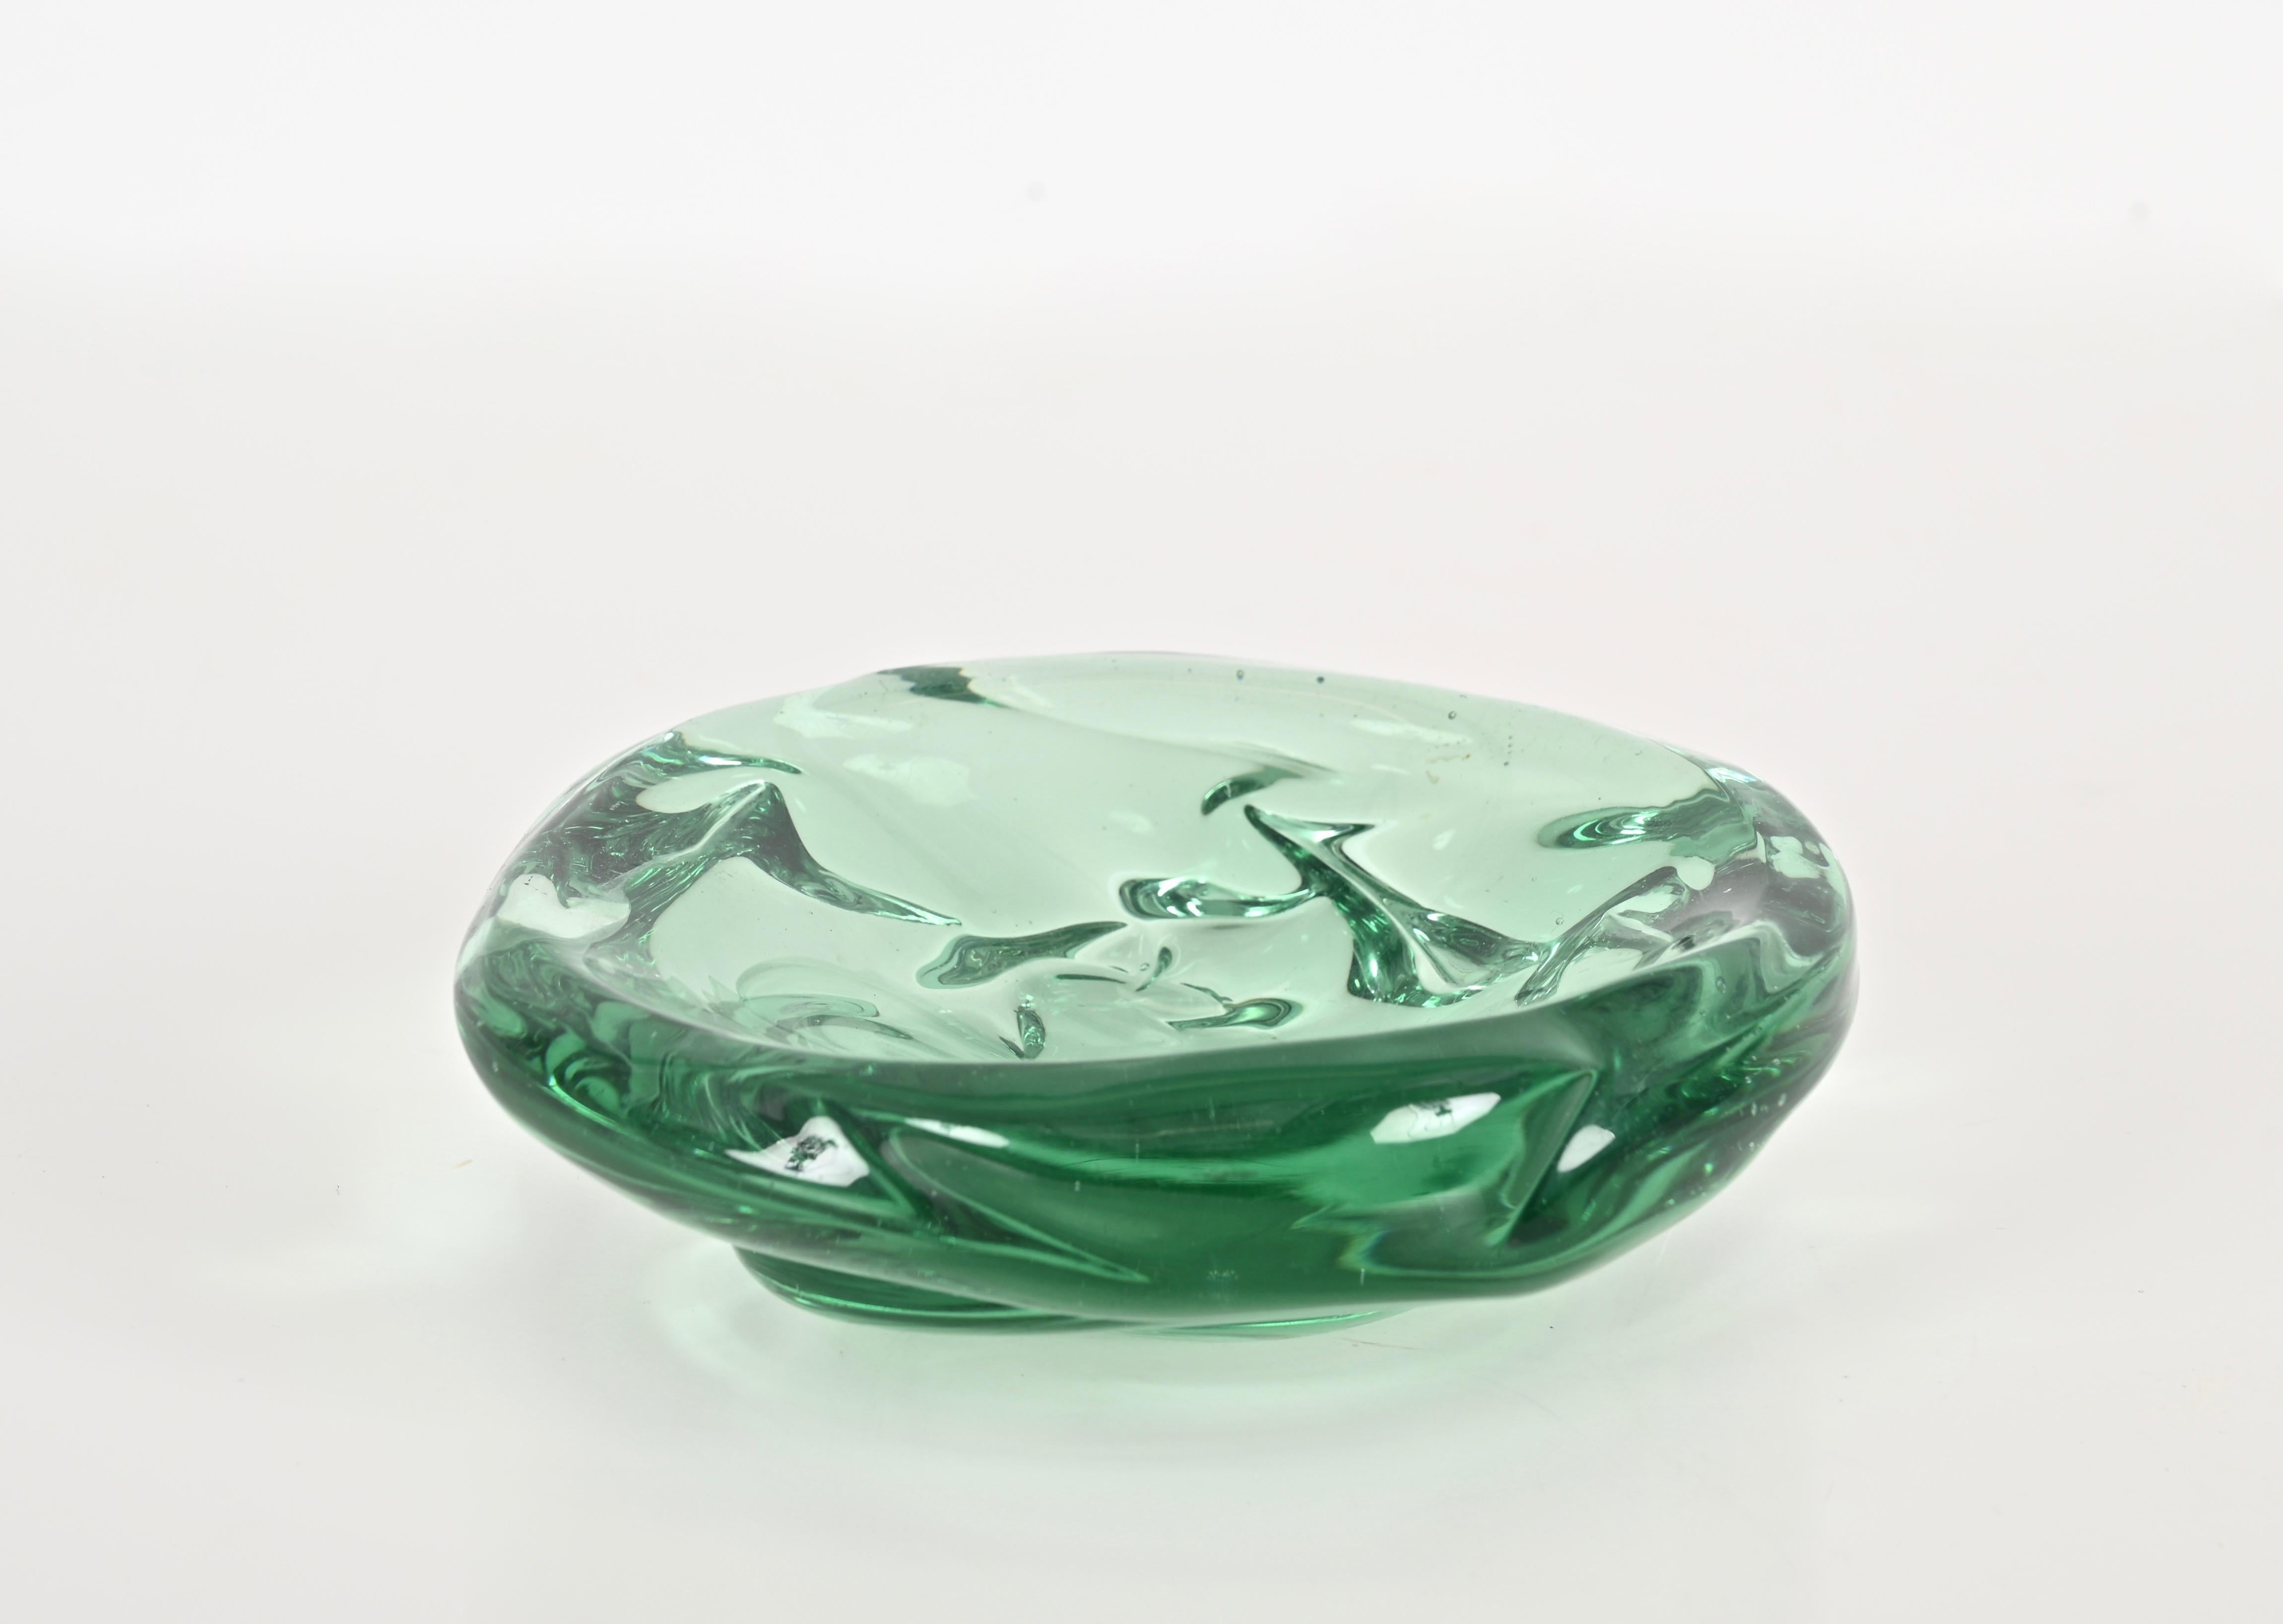 Green Murano Sommerso Glass Bowl Signed by Archimede Seguso, Italy, 1960s For Sale 2